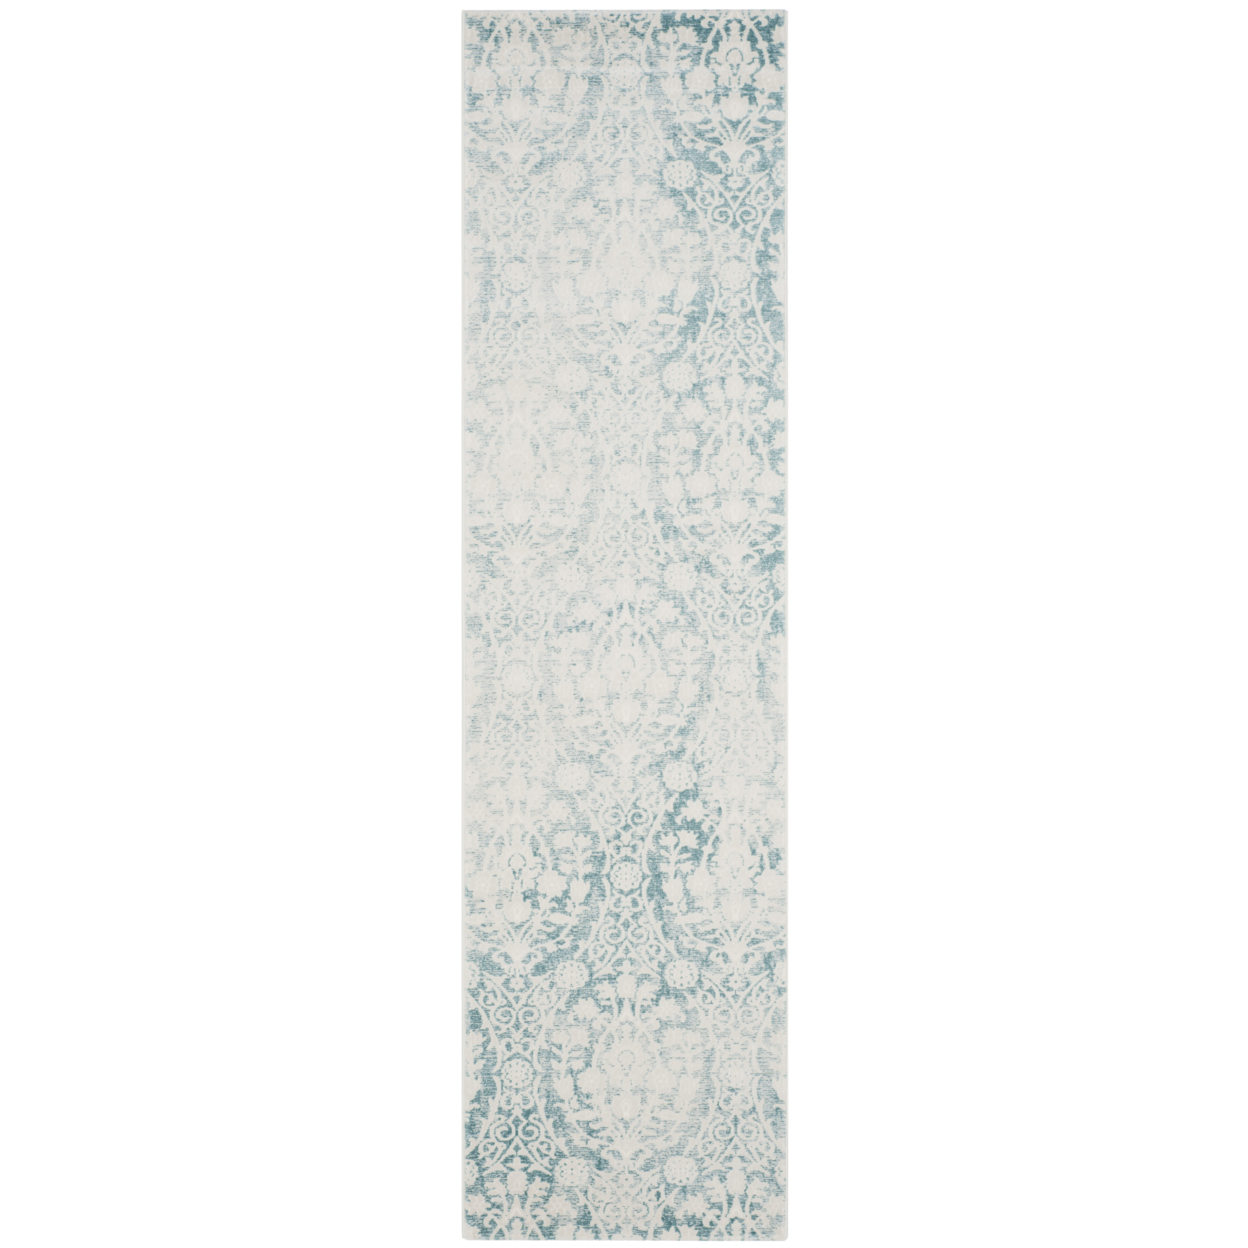 SAFAVIEH Passion Collection PAS403B Turquoise / Ivory Rug - 2' 2 X 10'